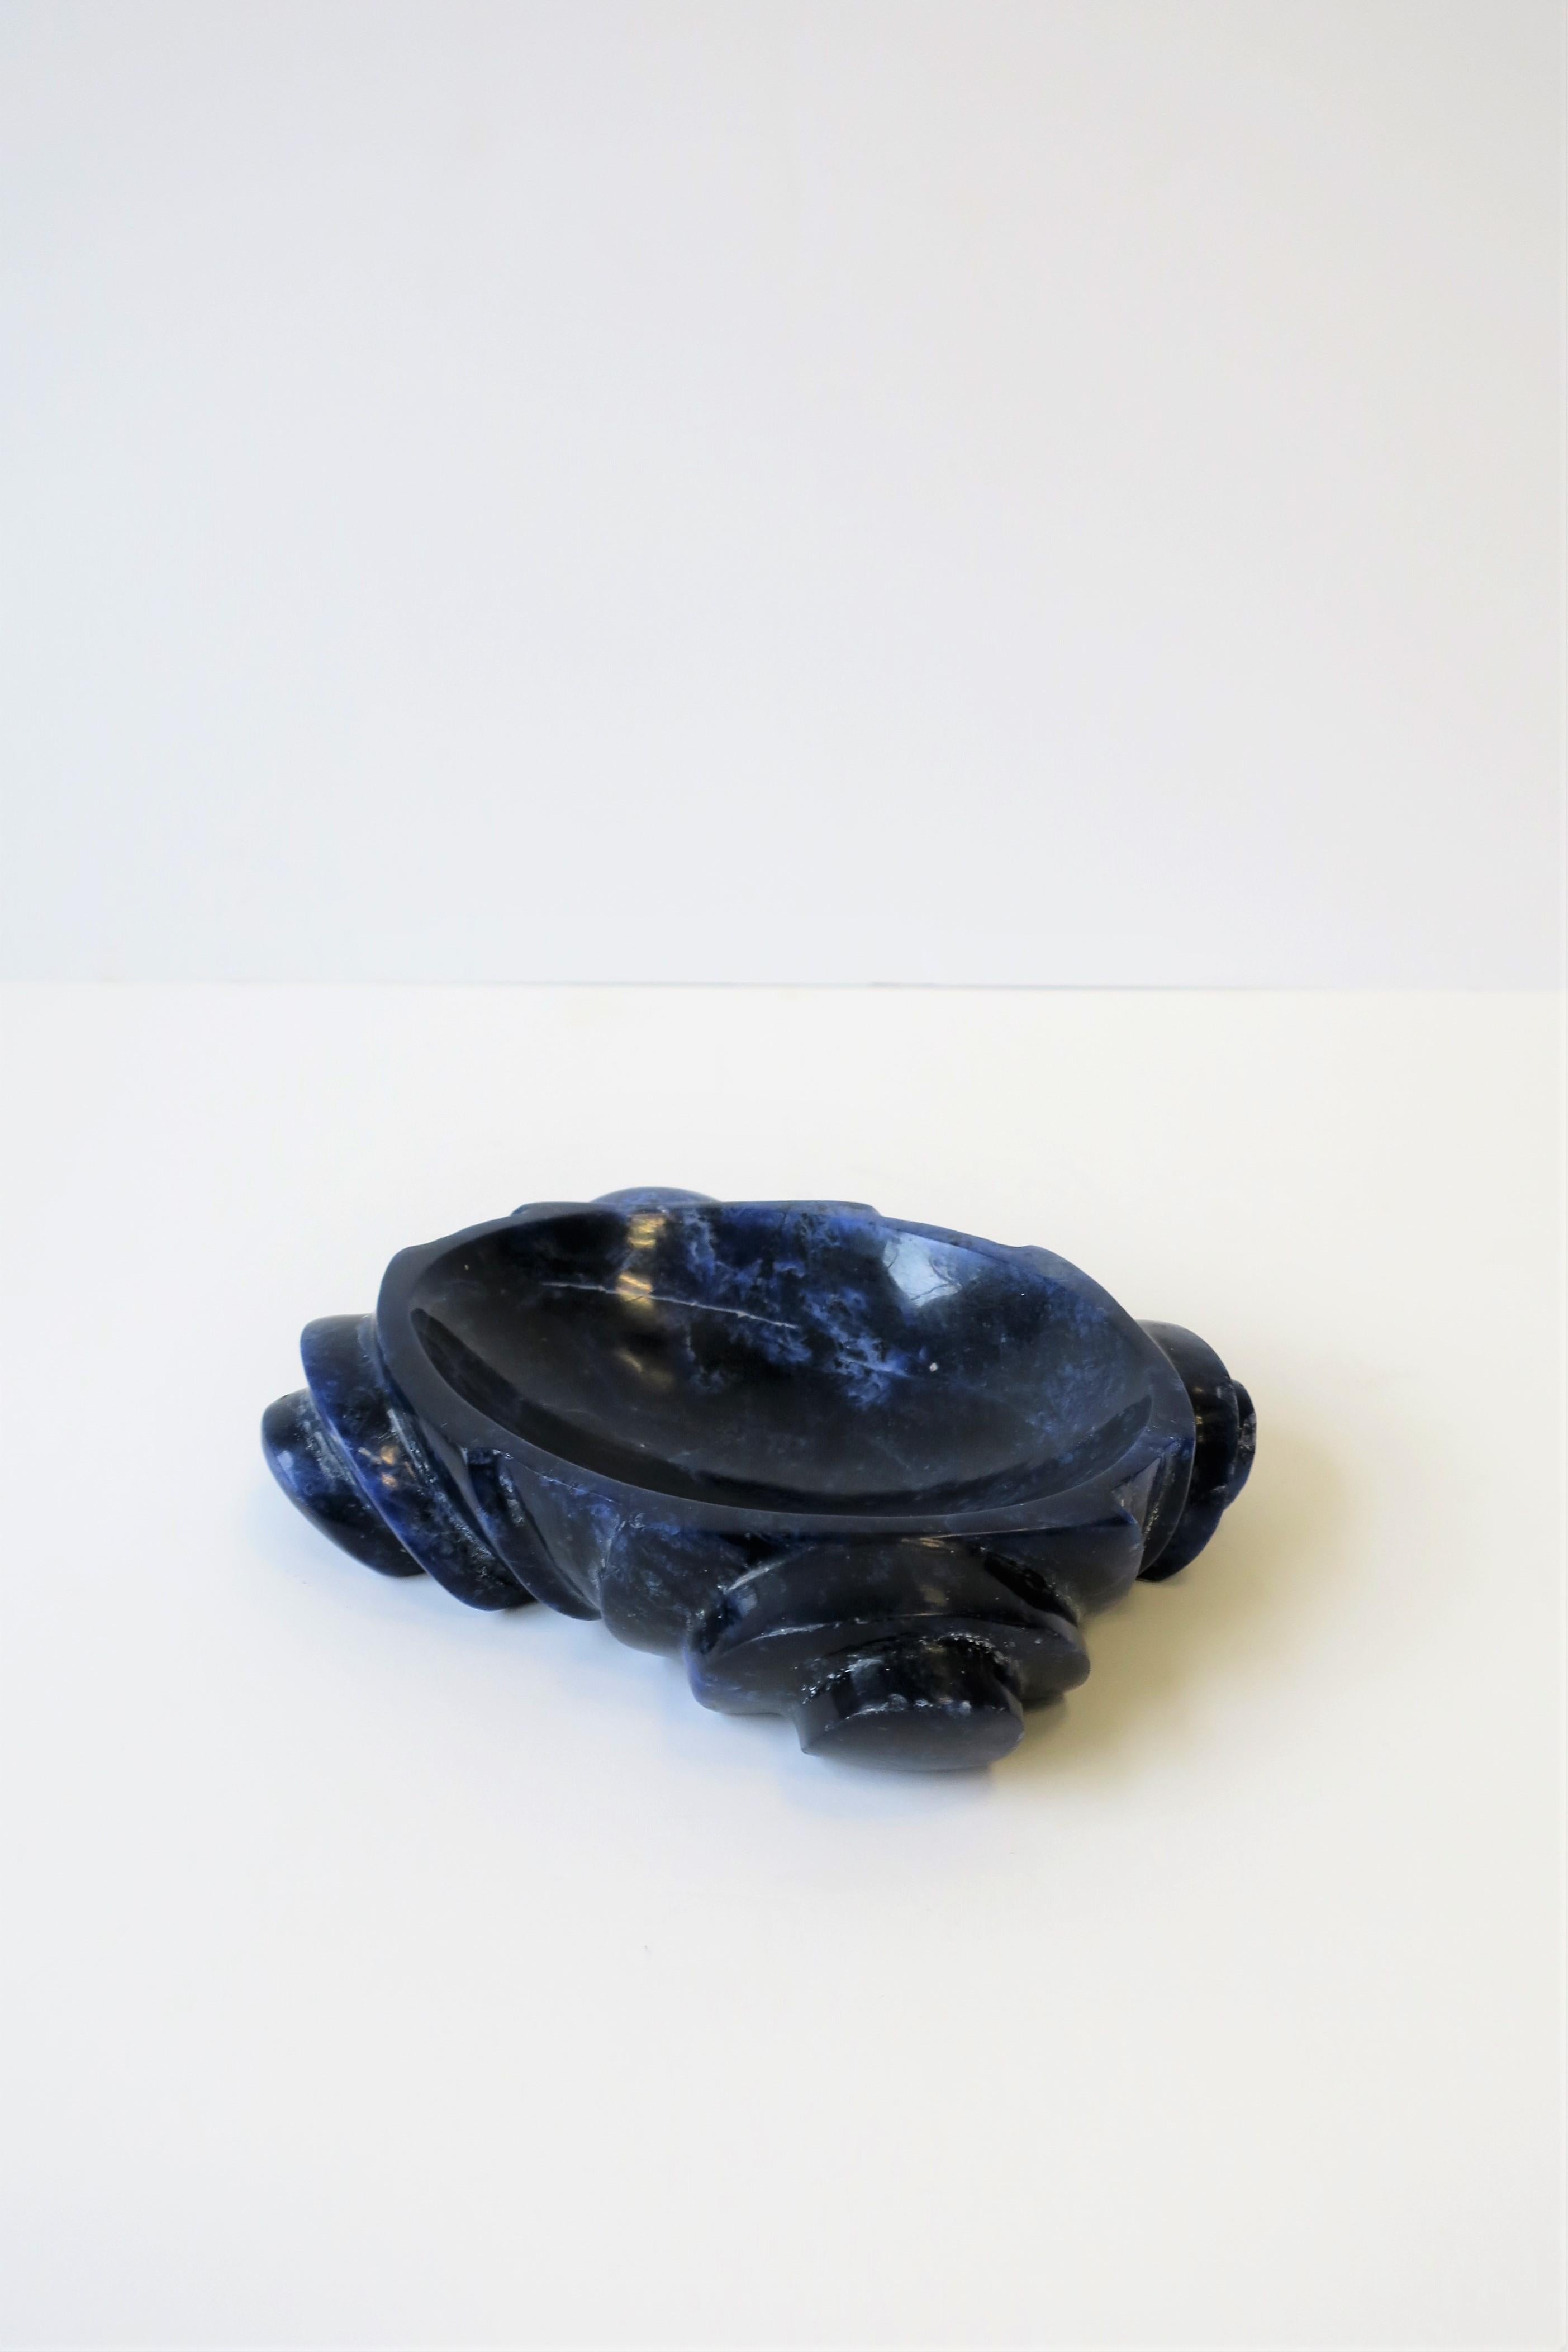 A beautiful blue and white oval carved sodalite stone dish/bowl/vessel. Piece is shown in images as a jewelry dish, but can work equally well for other small items including as a soap dish. 

Piece measures: 4.25 in. D x 5.25 in. D x 1.5 in. H


